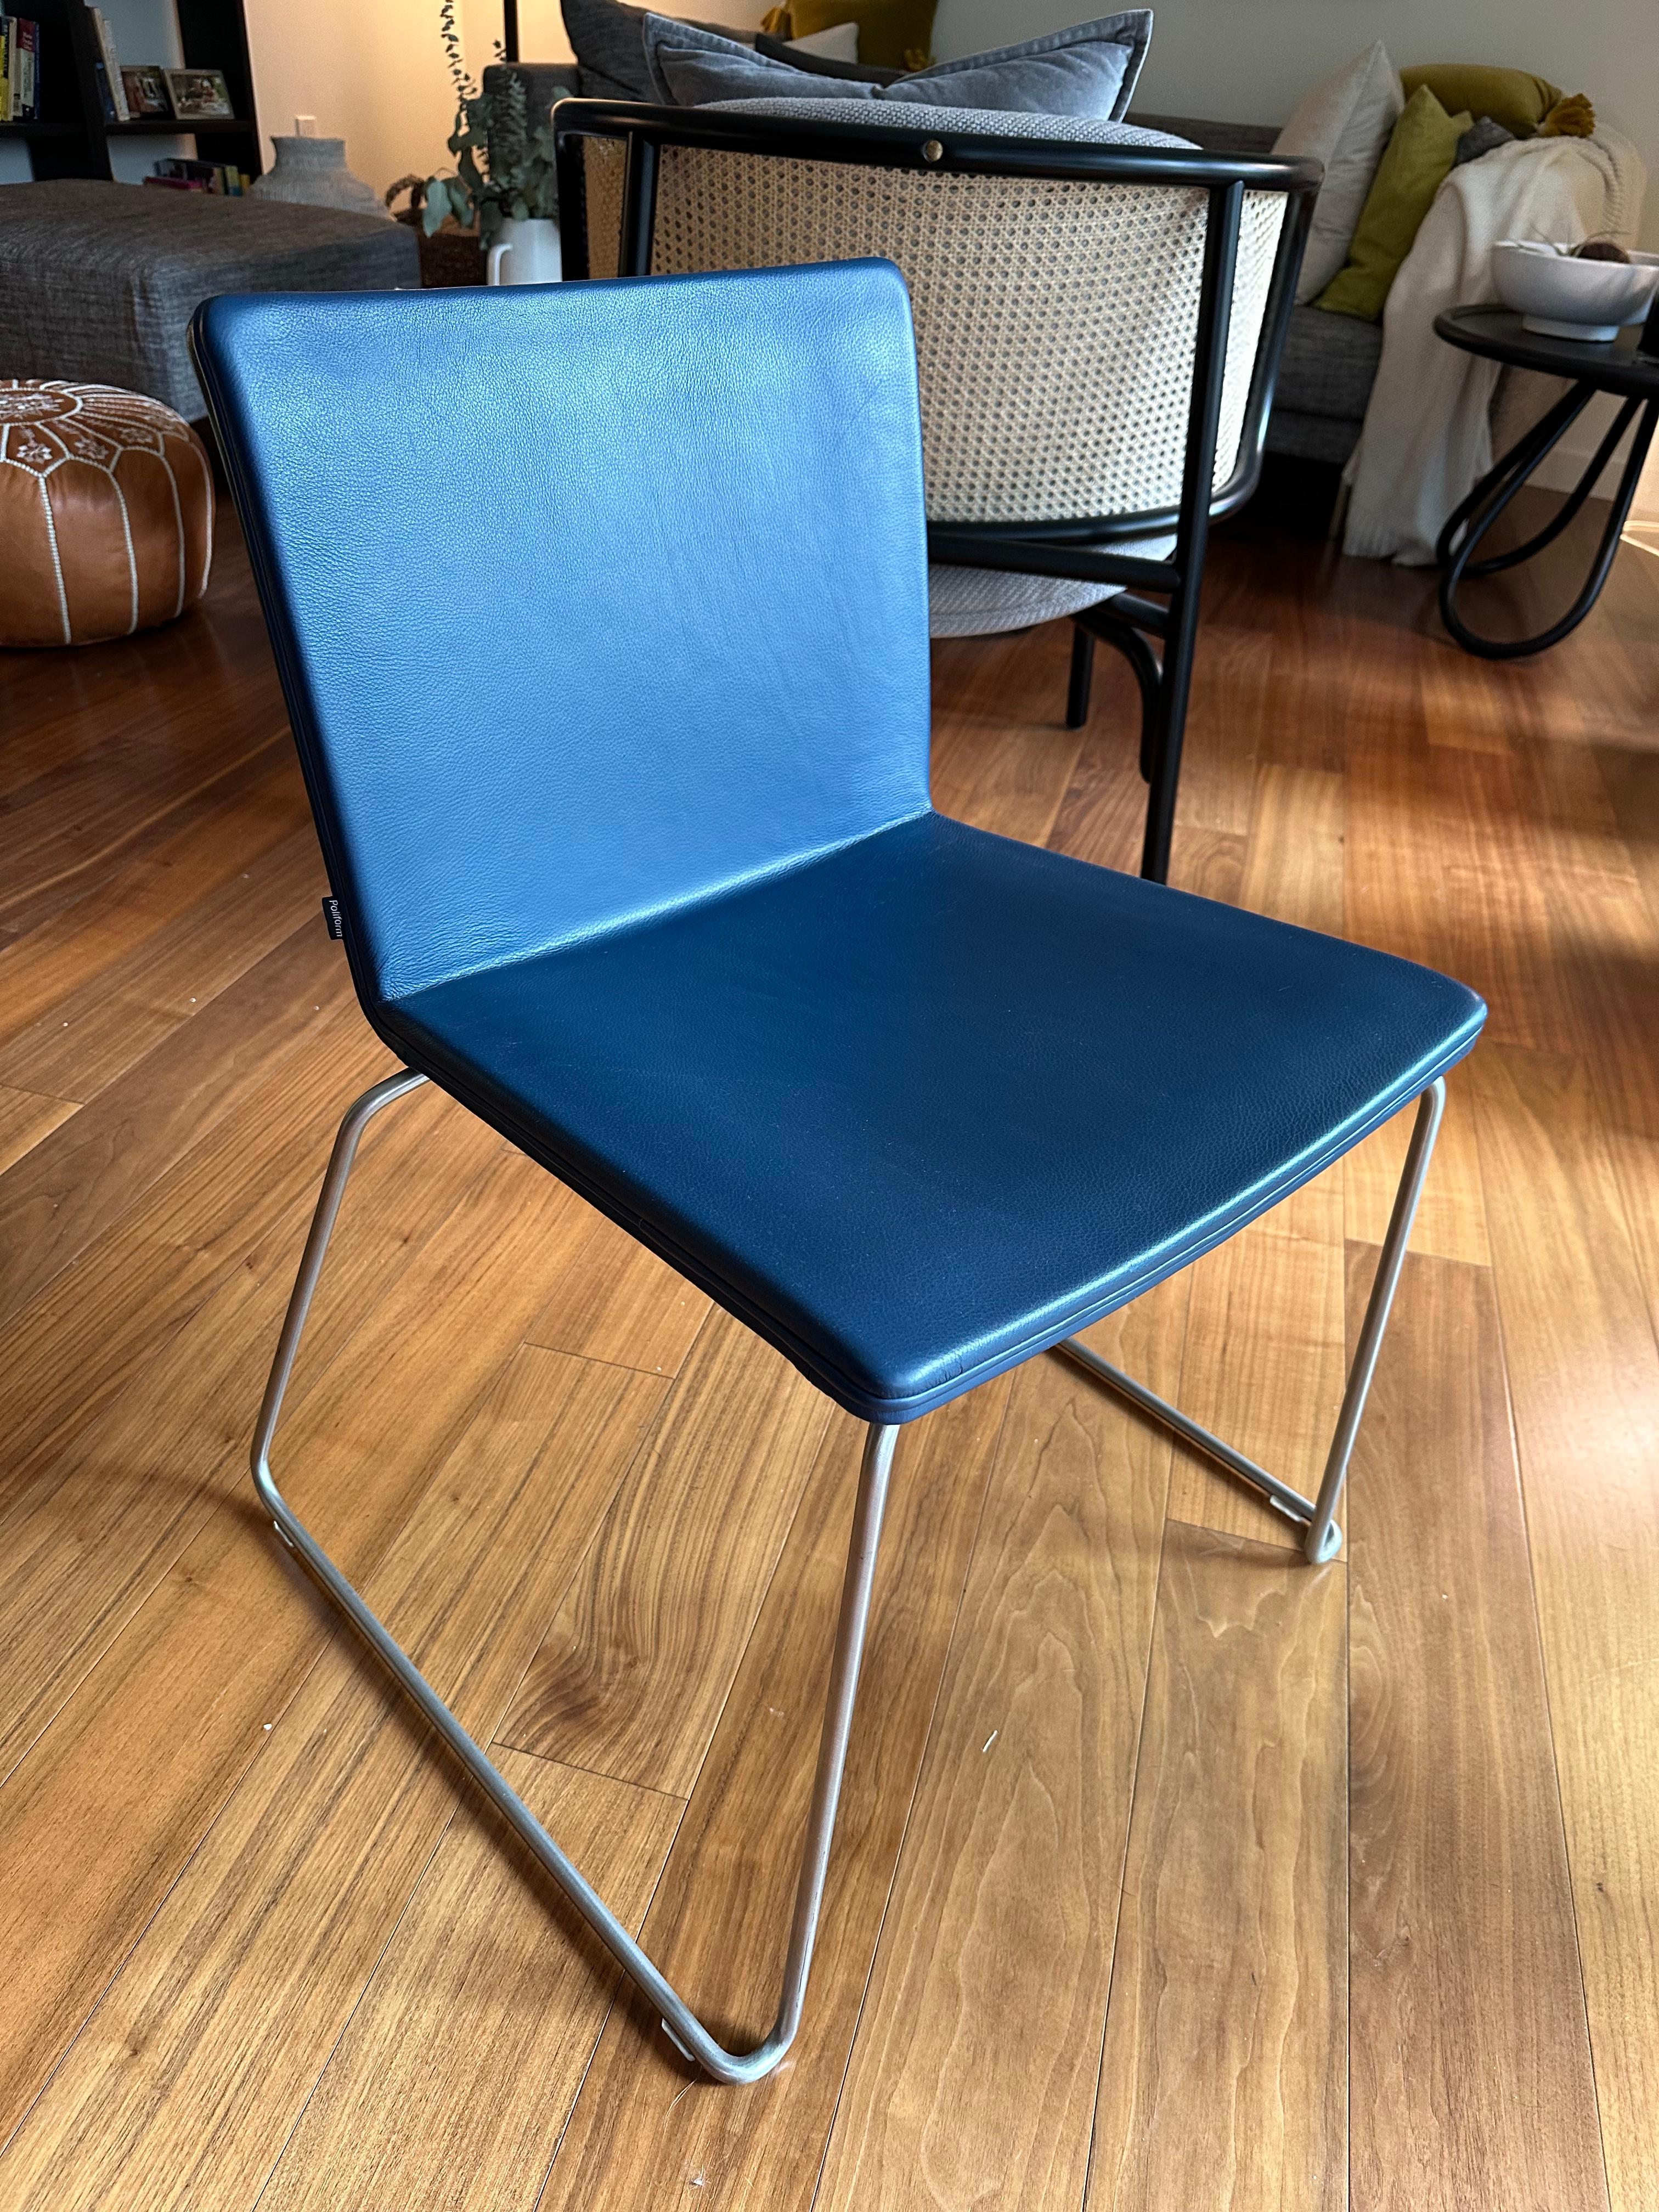 Originally designed by Mario Mazzer for Poliform in 2003, the Nex dining chair is the epitome of sleek and modern design. Featuring a chromed metal frame with sled base, the seat is molded for comfort and upholstered blue leather. This chair would